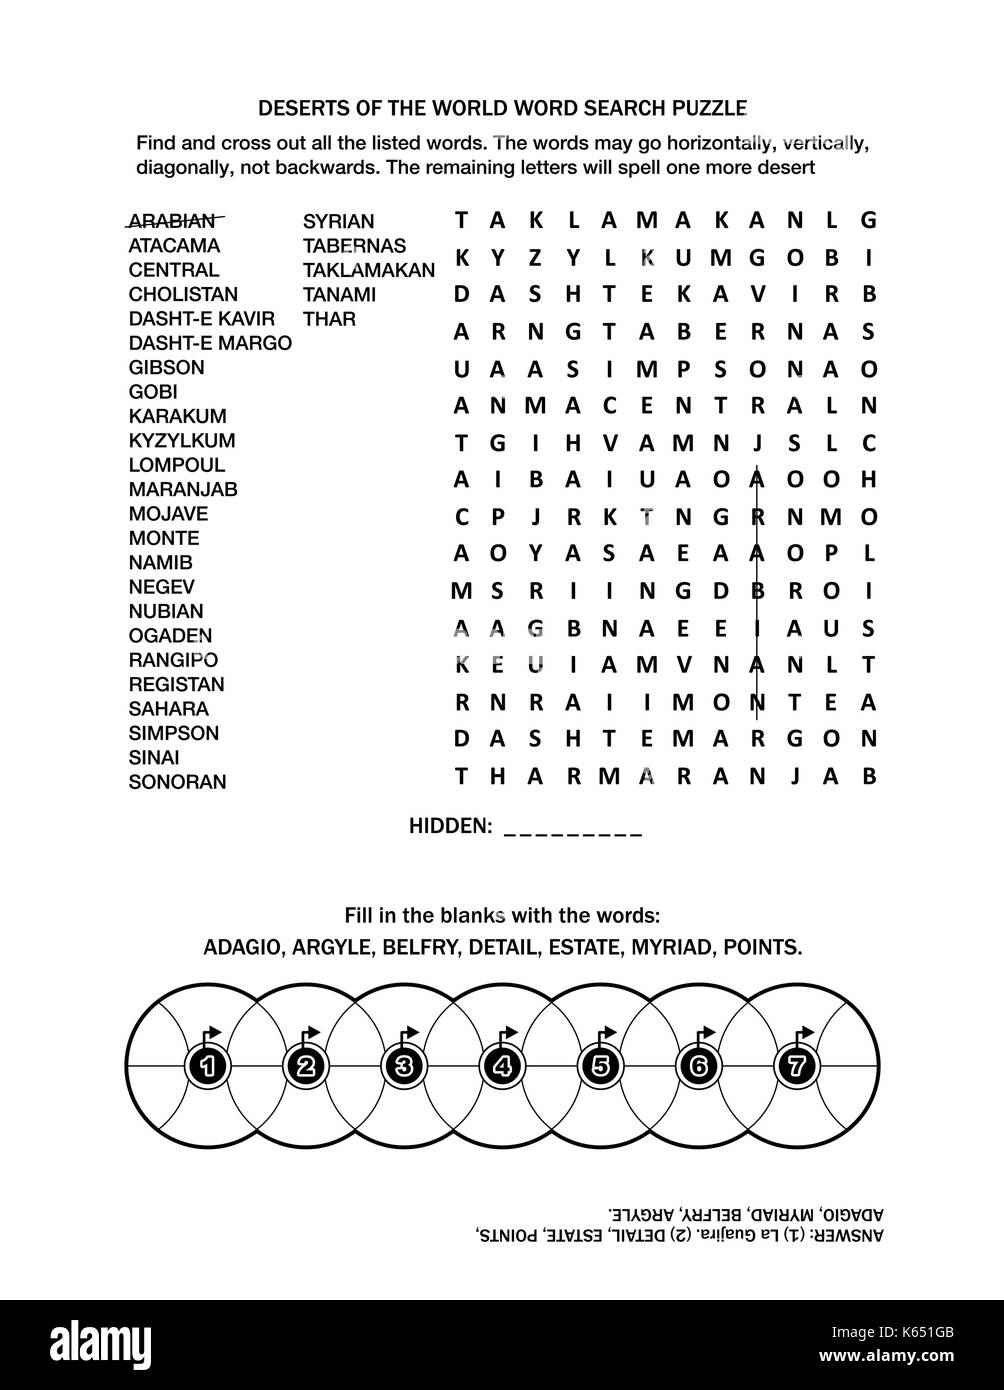 Cinco Mayo Word Search Puzzle English Esl Worksheets For Games Regrouping Math Problems Cinco De Mayo Worksheets Worksheets Worksheet For Kids Math Games For 6 Graders Free Math Board Games Regrouping Math